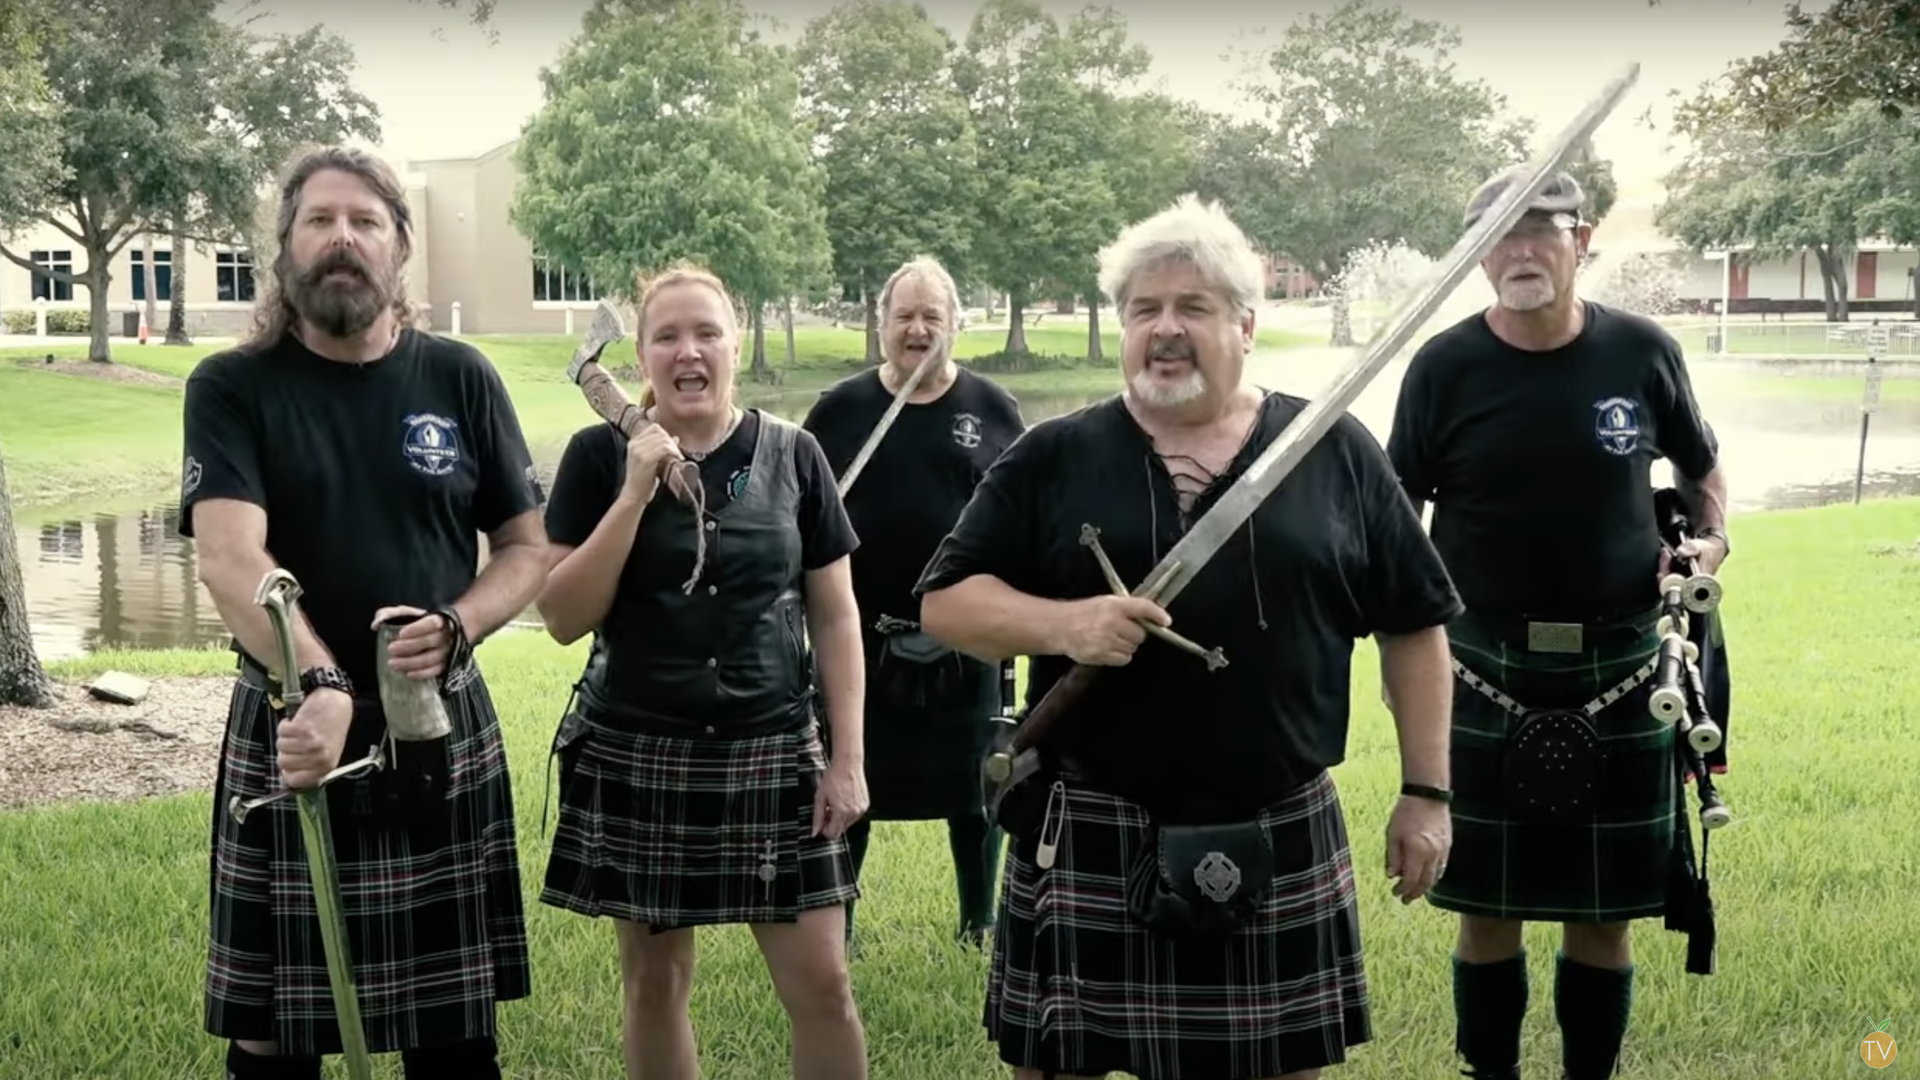 A group of people dressed in kilts and holding swords 